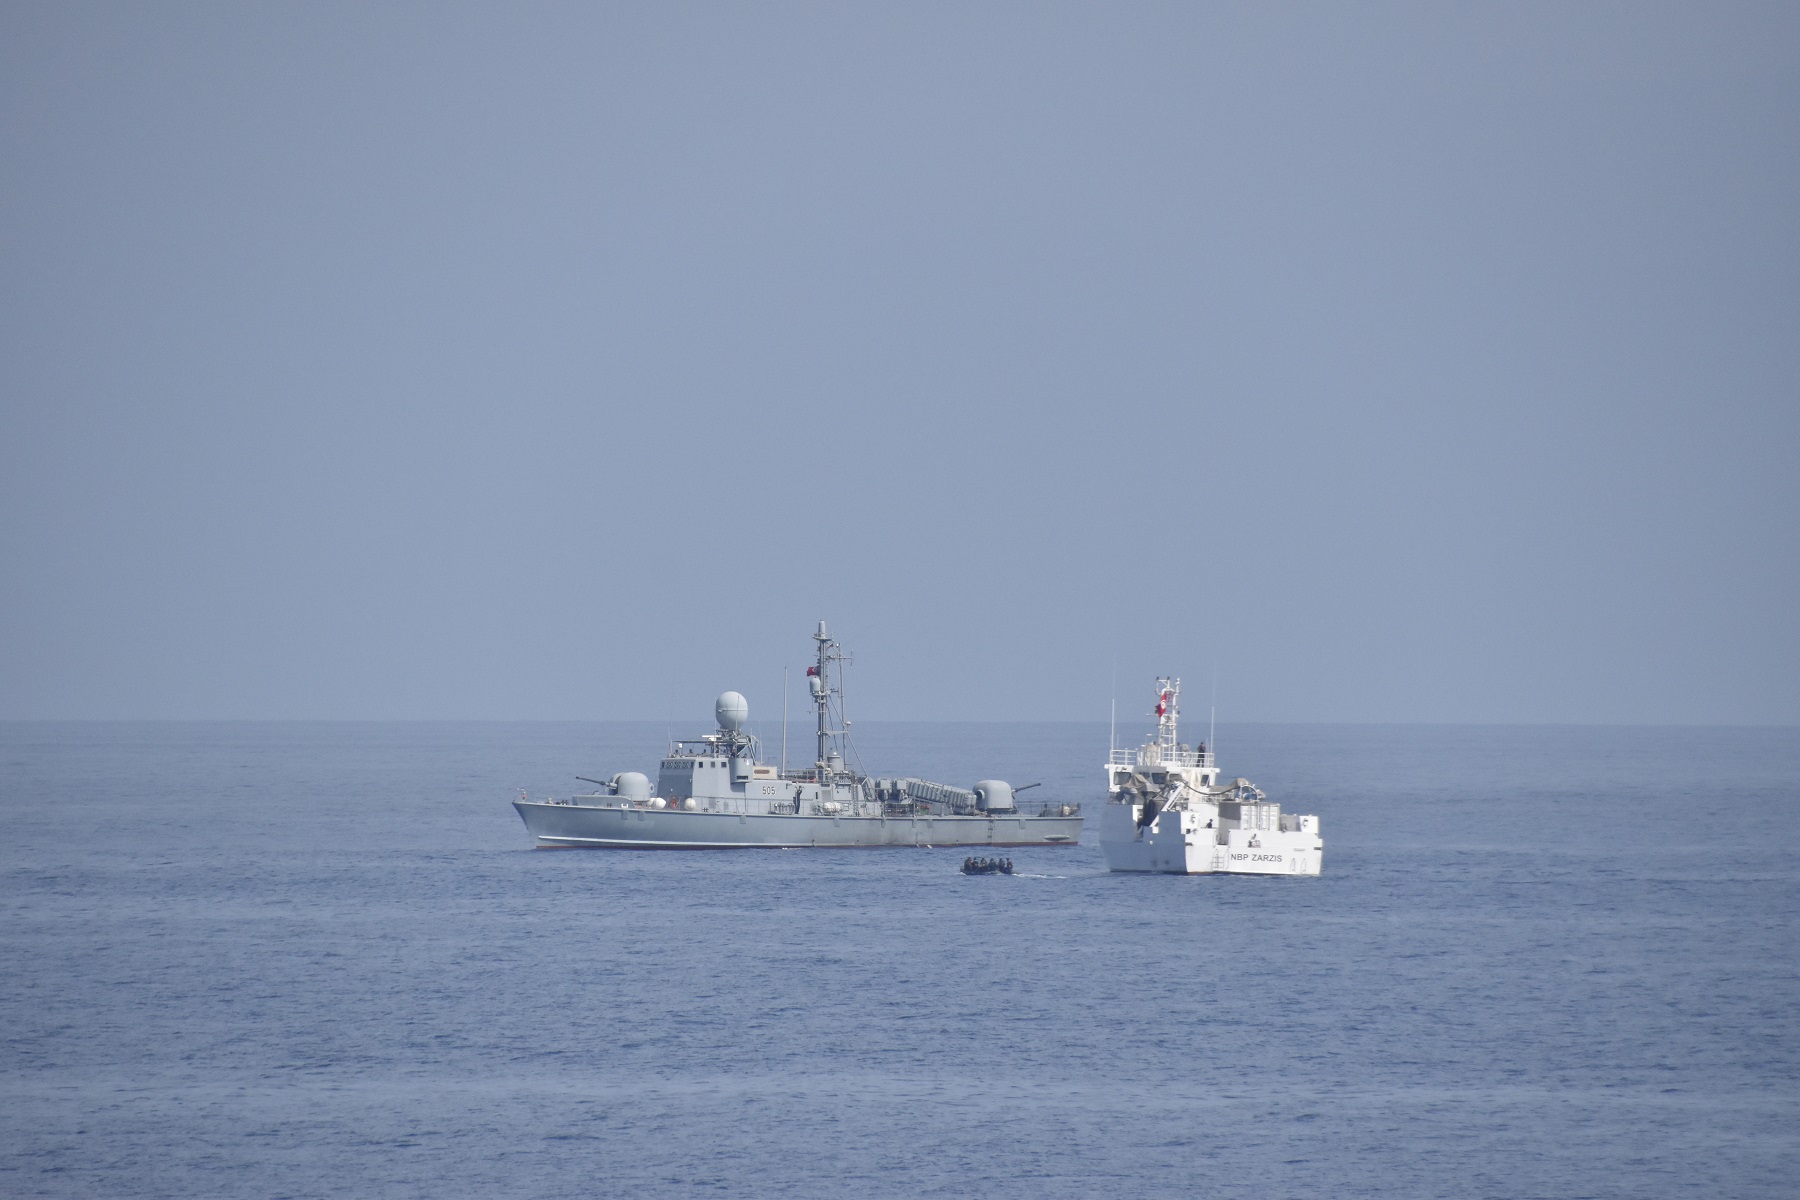 The exercises focused on developing both nations' ability to conduct maritime security operations, further enhancing cooperation between U.S. and Tunisian forces in order to increase maritime safety and security in the Mediterranean.